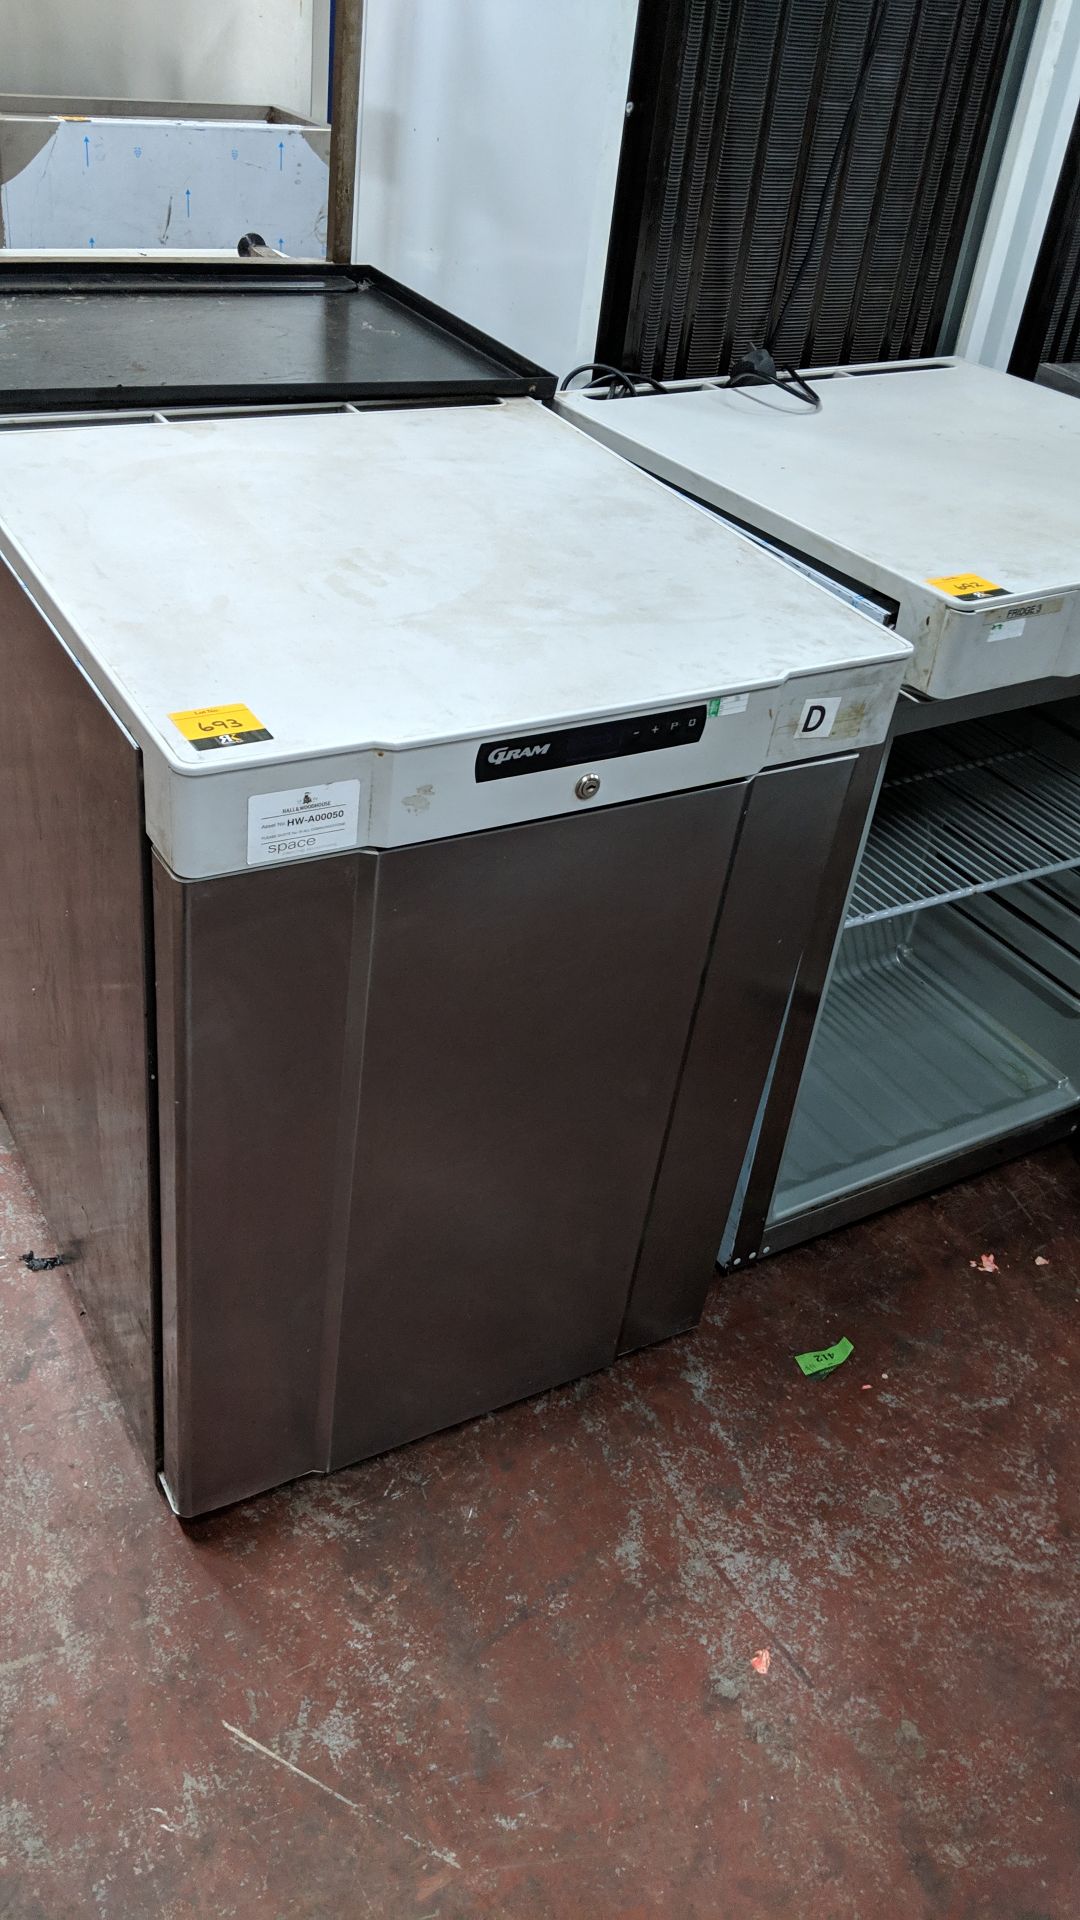 Gram stainless steel under counter fridge IMPORTANT: Please remember goods successfully bid upon